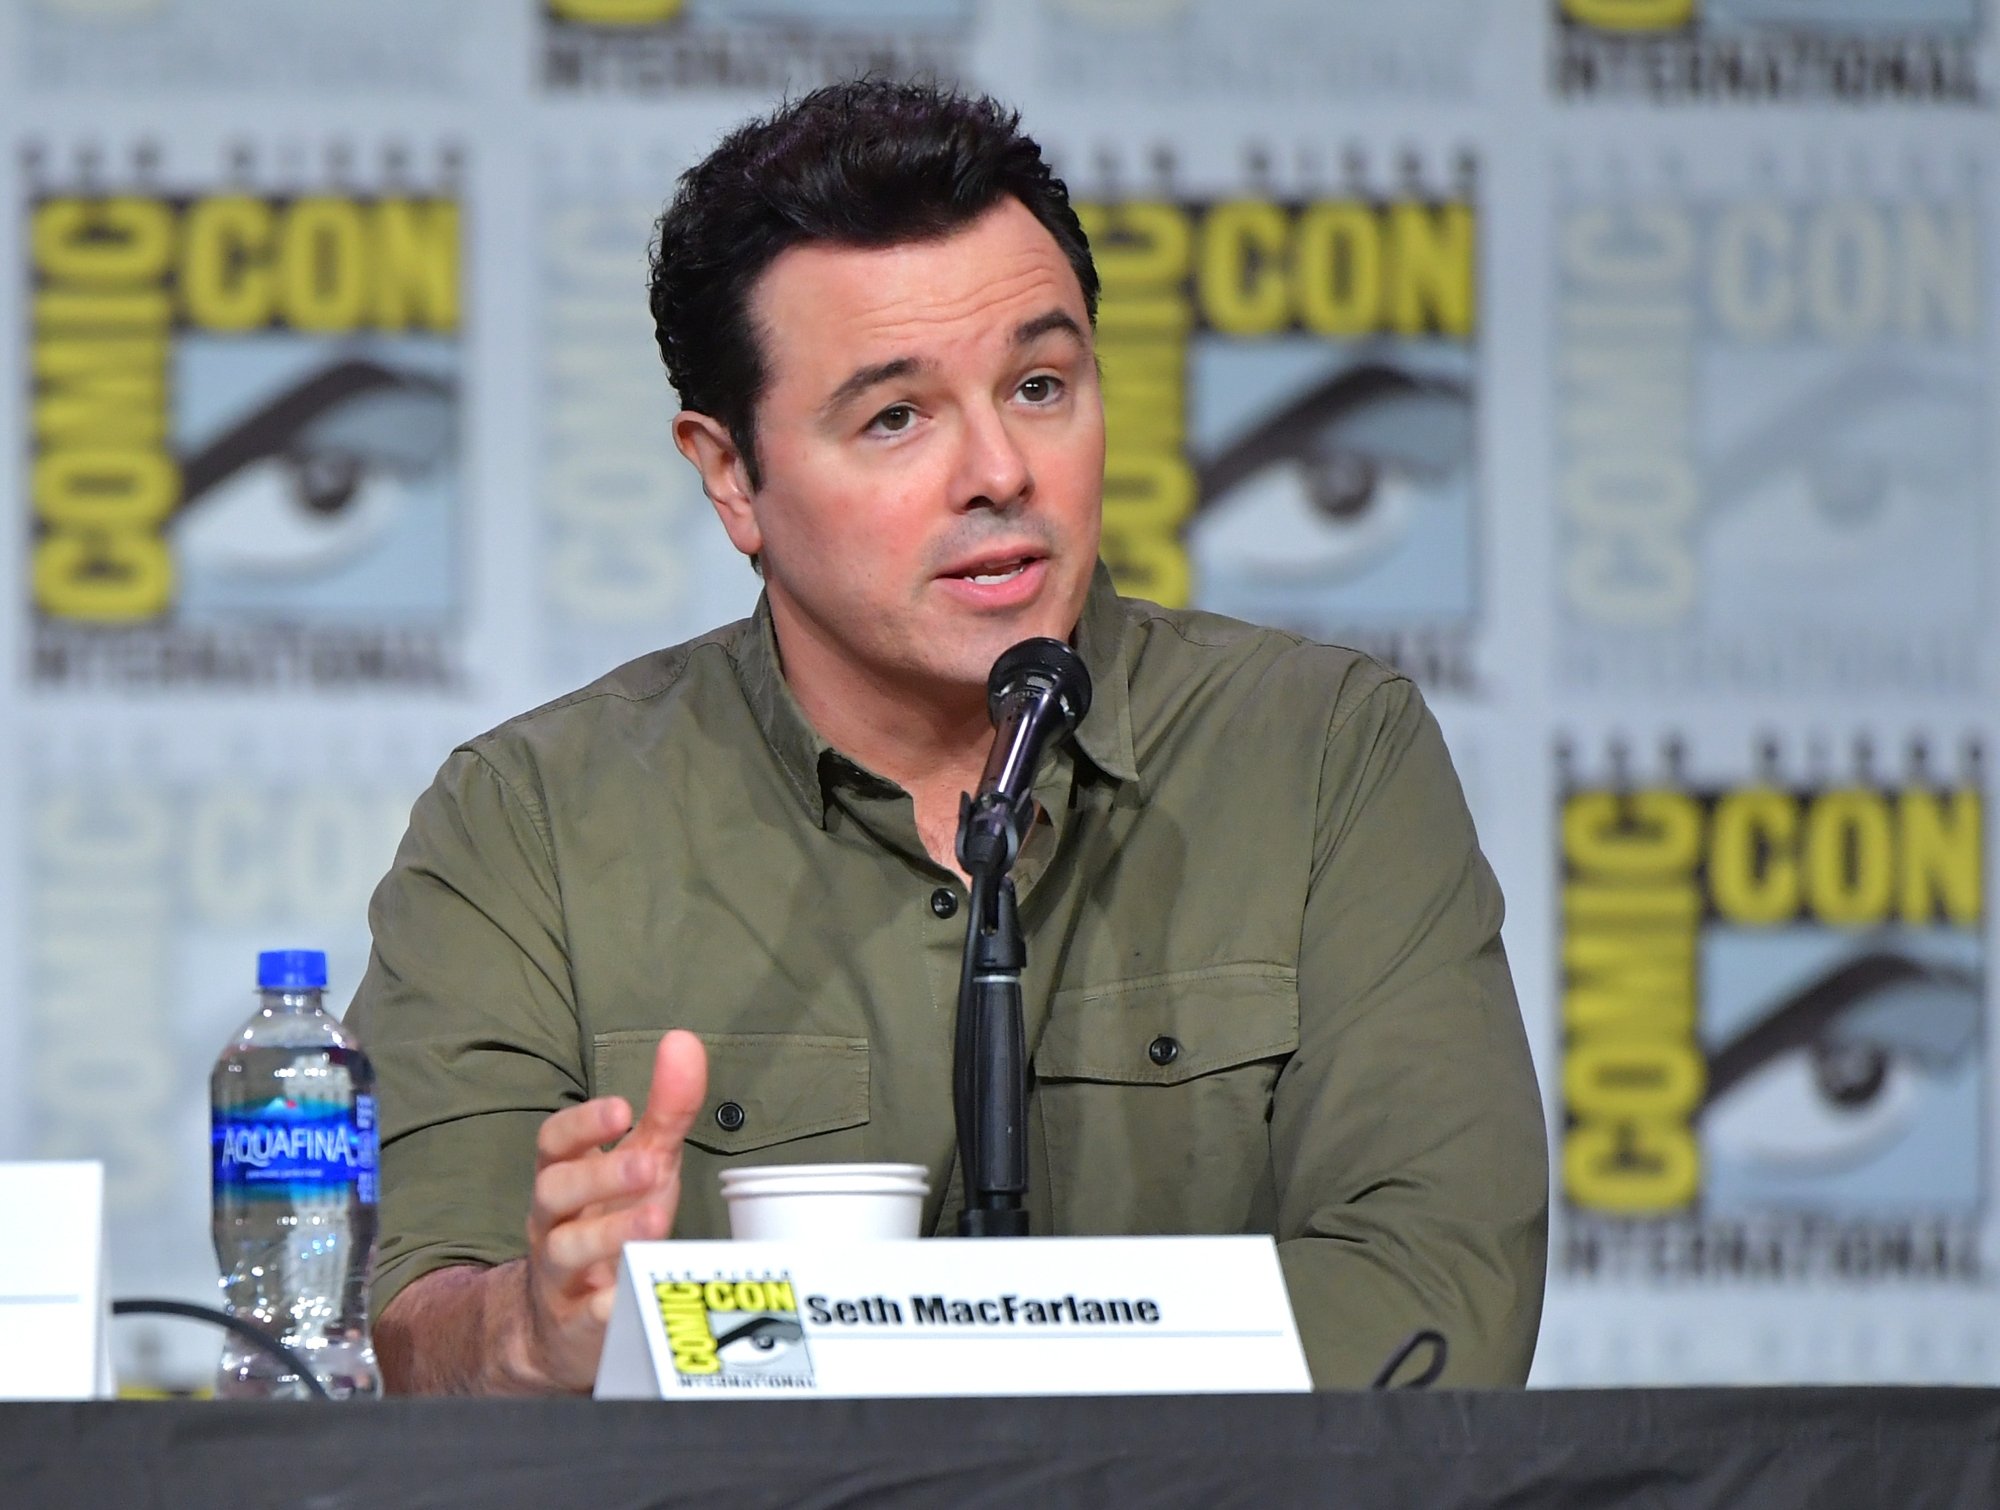 'Family Guy' creator Seth MacFarlane wearing a green shirt talking into a microphone at Comic-Con with a name card in front of him on the table.